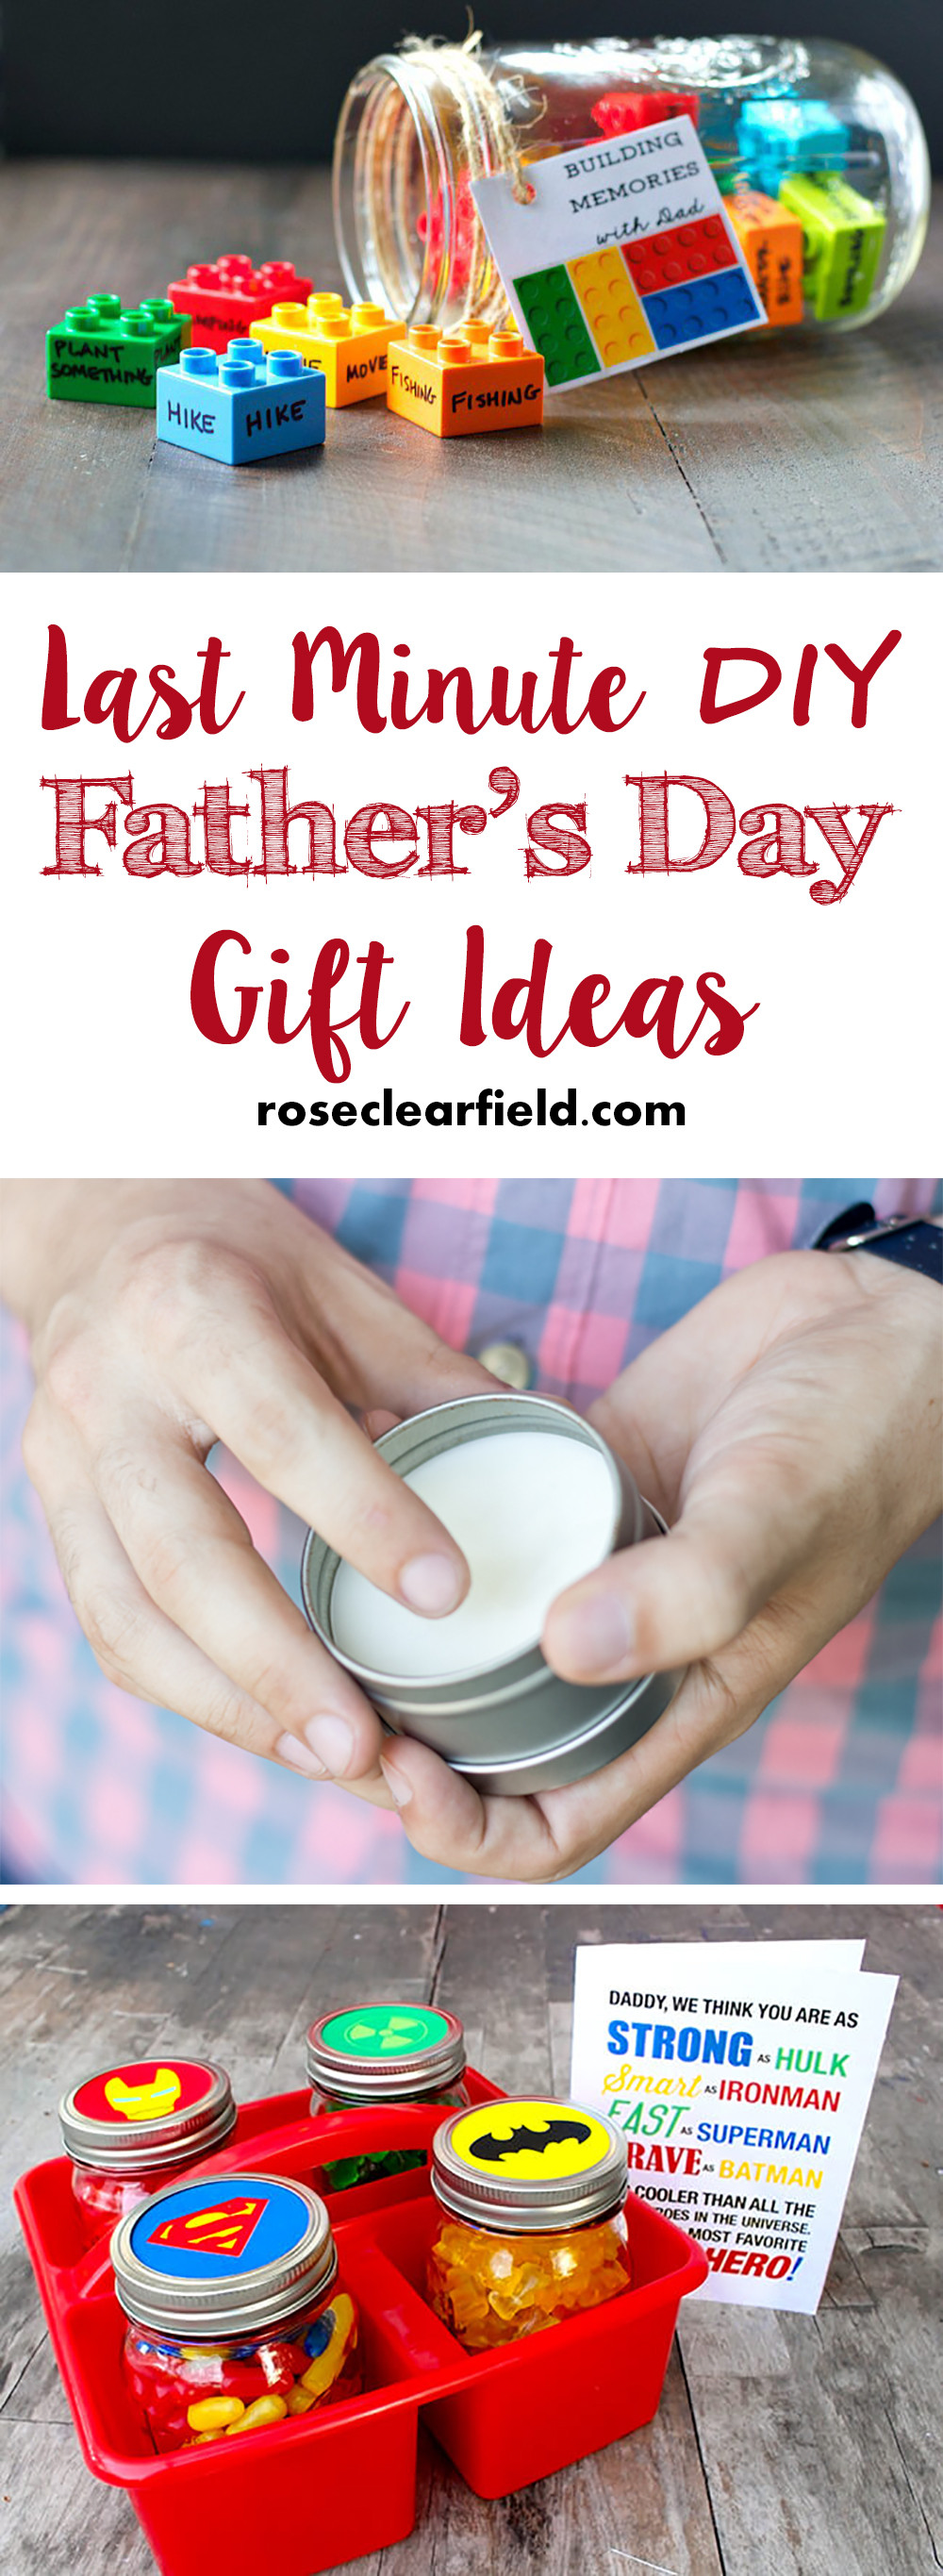 Diy Father Day Gift Ideas
 Last Minute DIY Father s Day Gift Ideas • Rose Clearfield